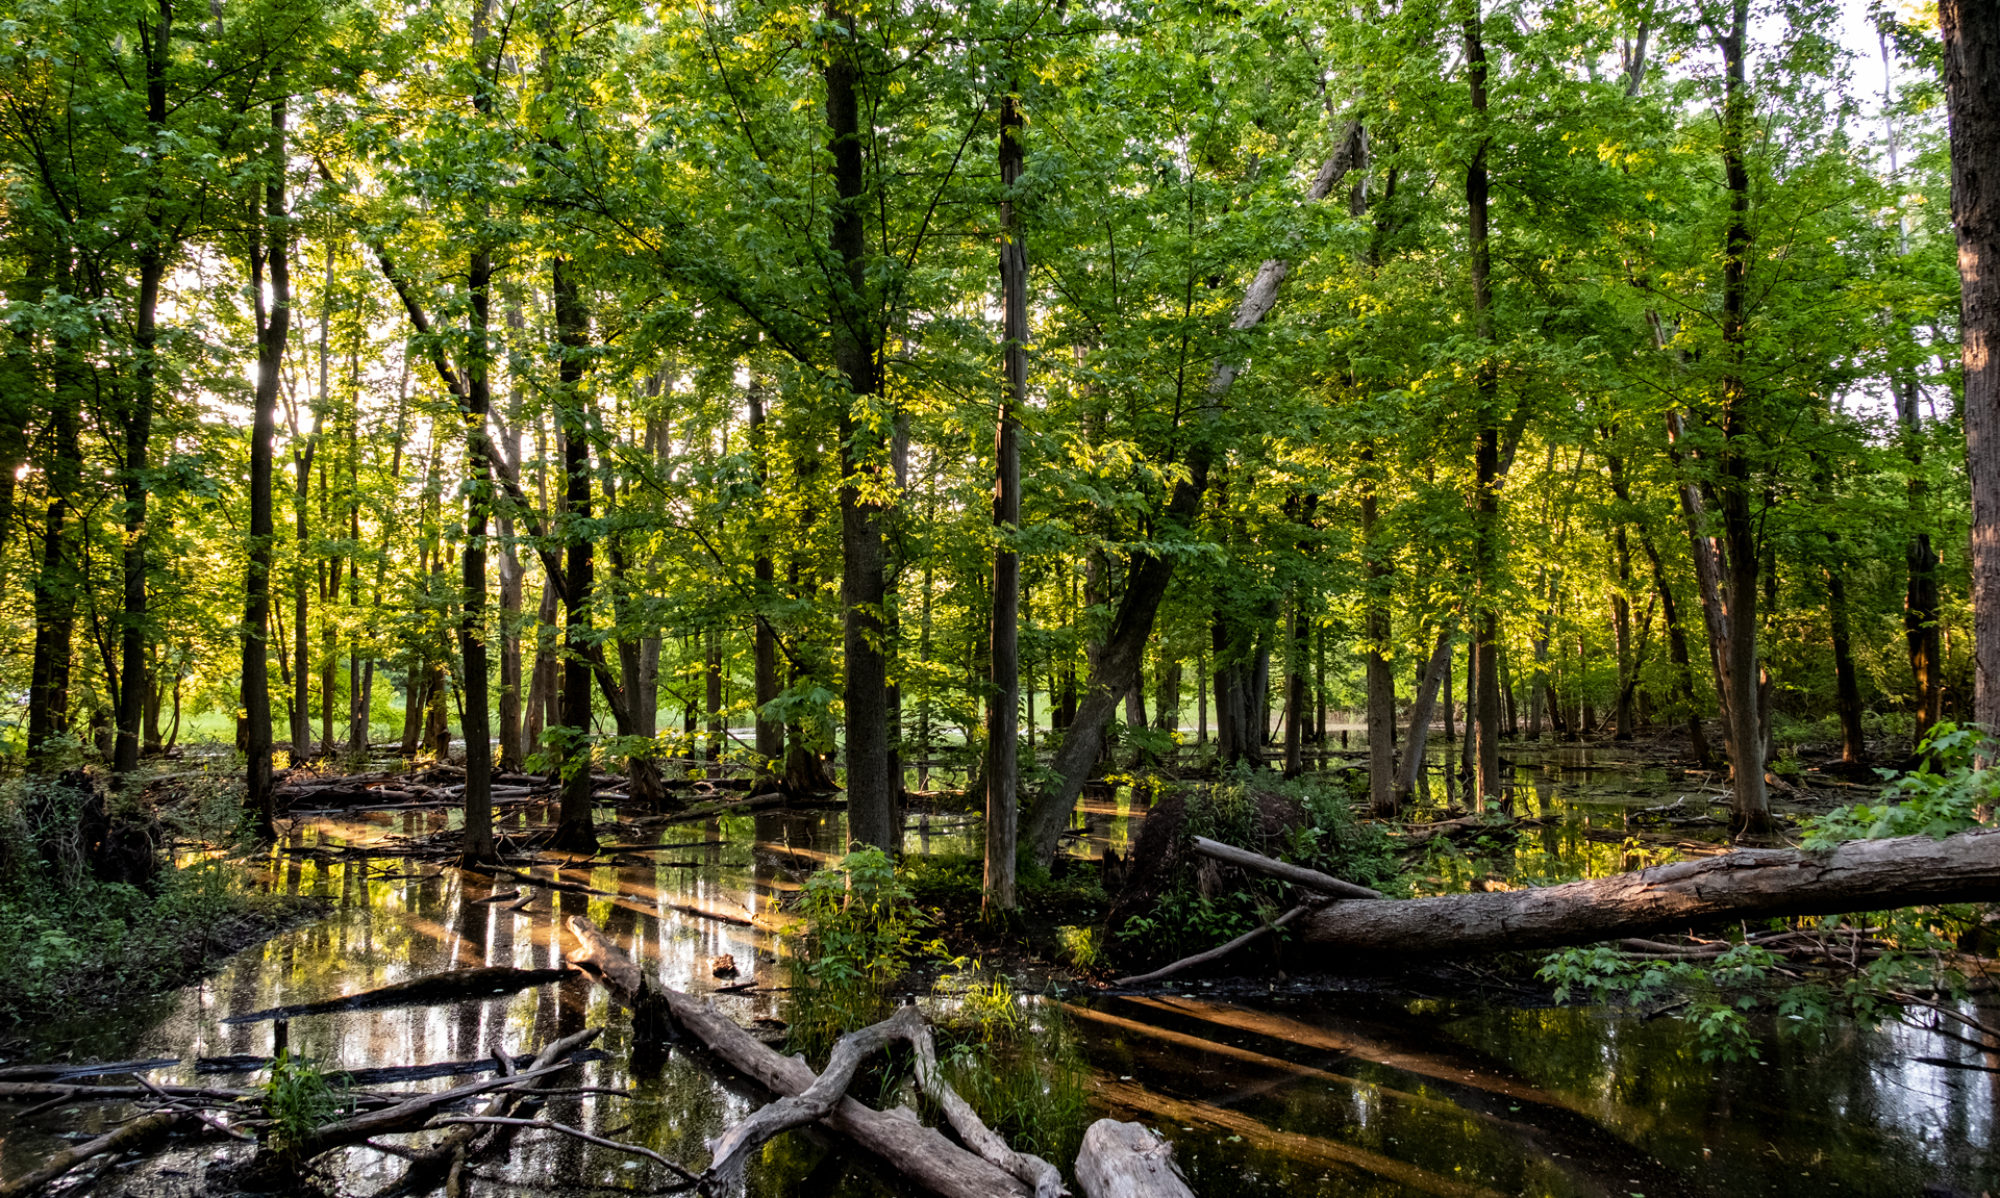 A colour photo of a view of trees in swampy waters